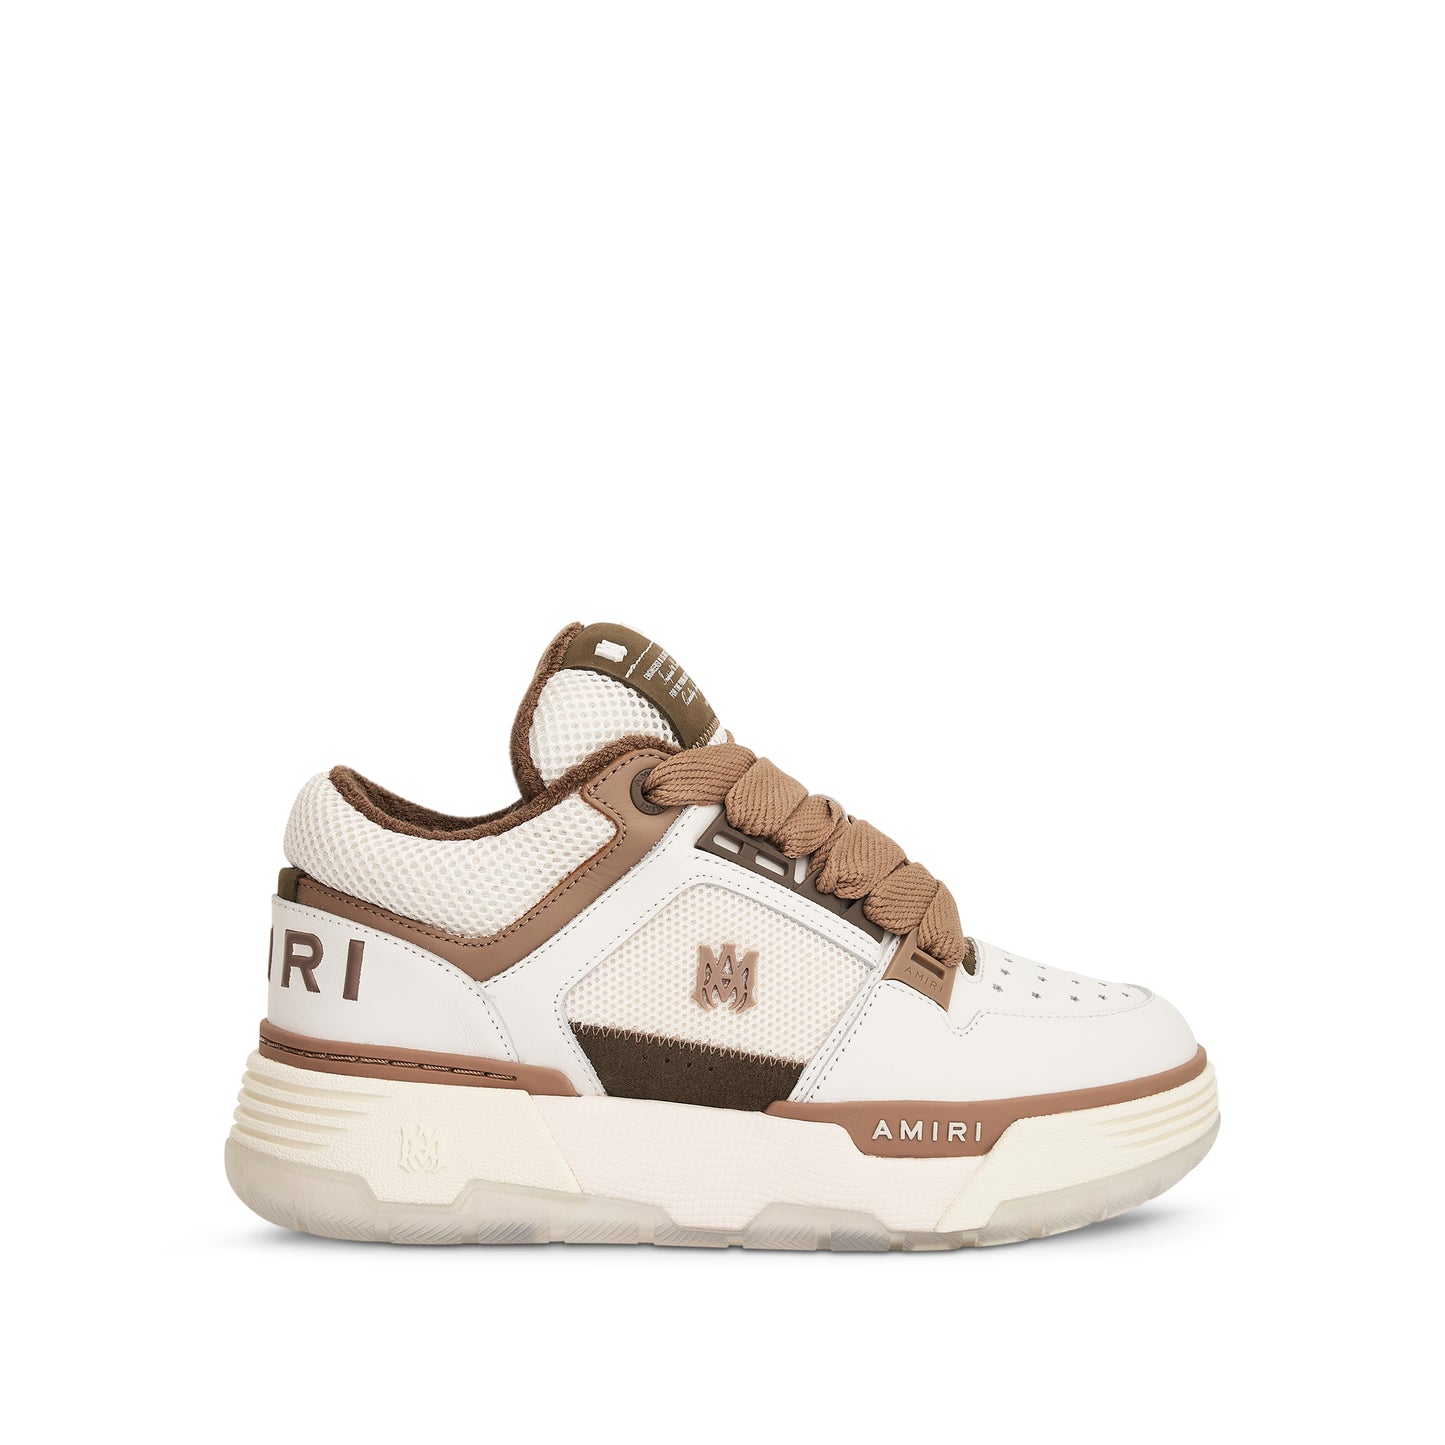 MA 1 Sneakers in White/Brown